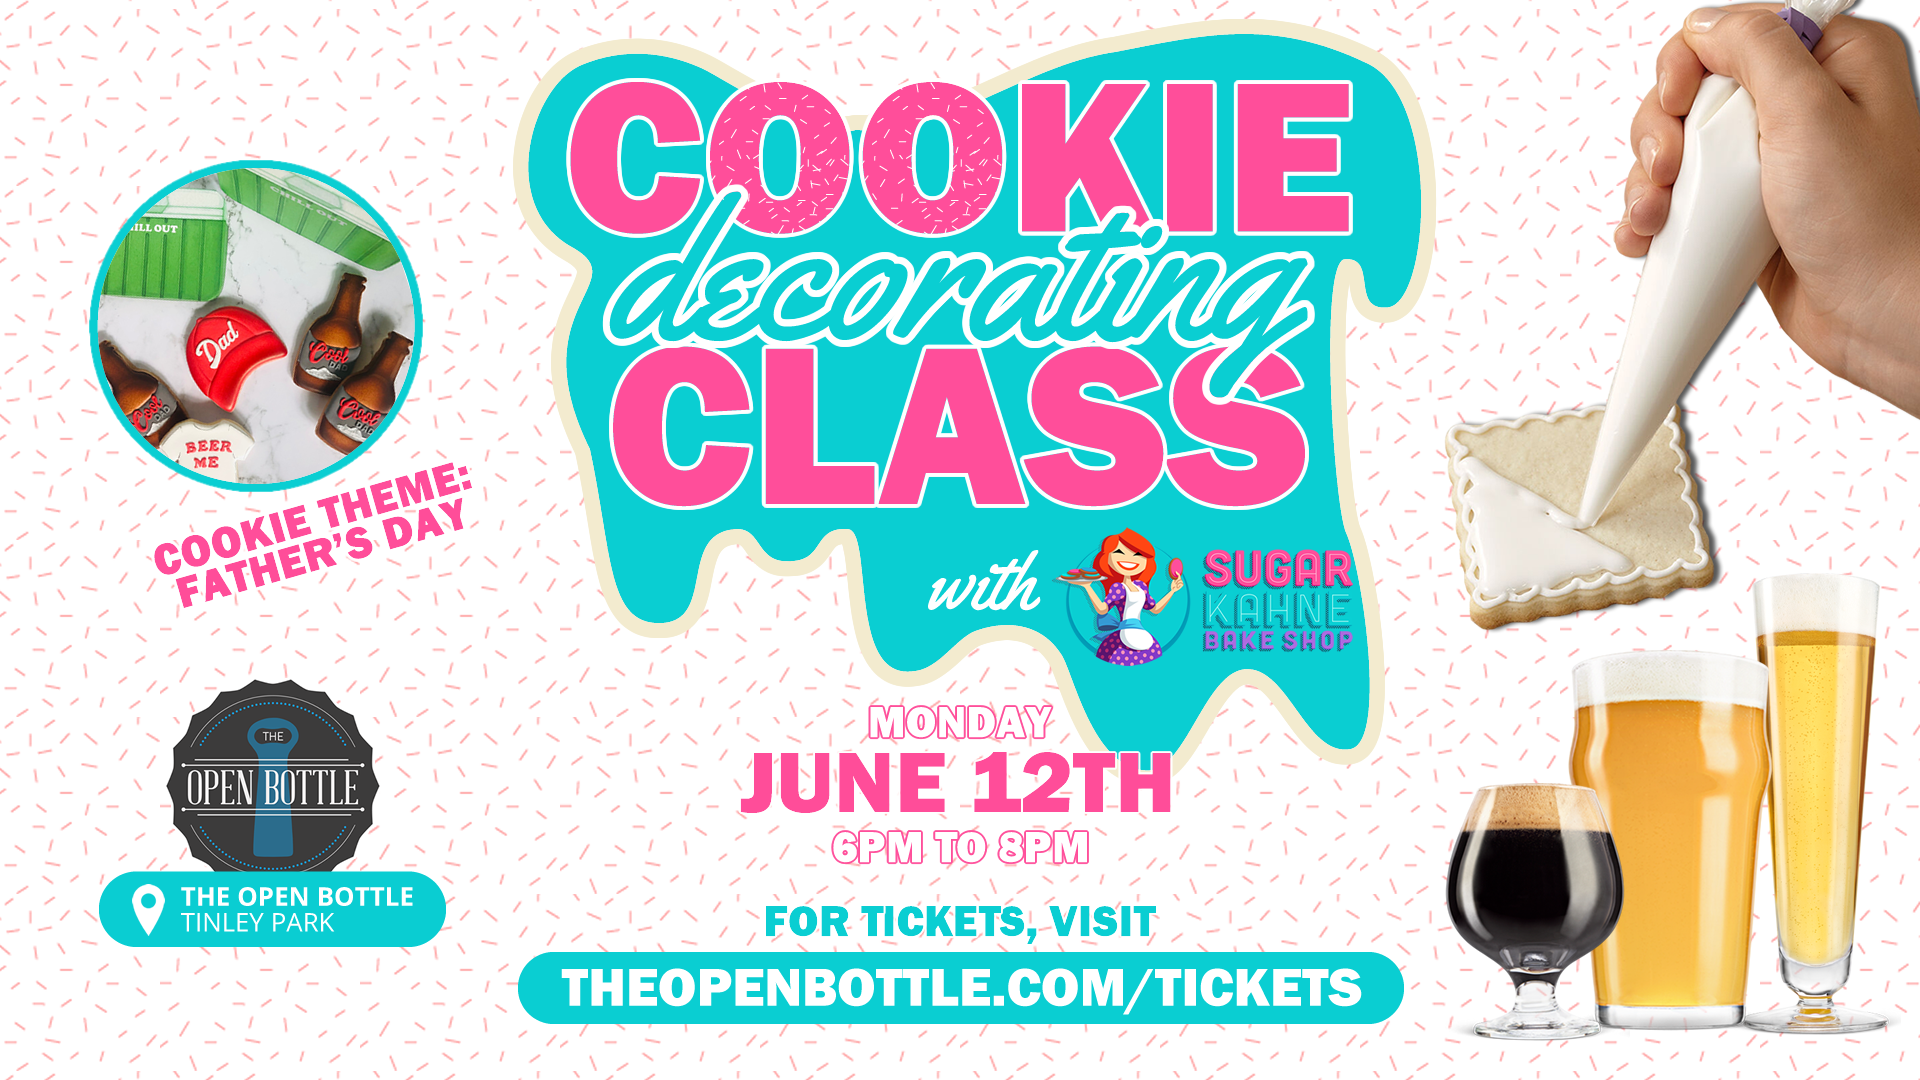 Event: Cookie Decorating Class at Tinley Park